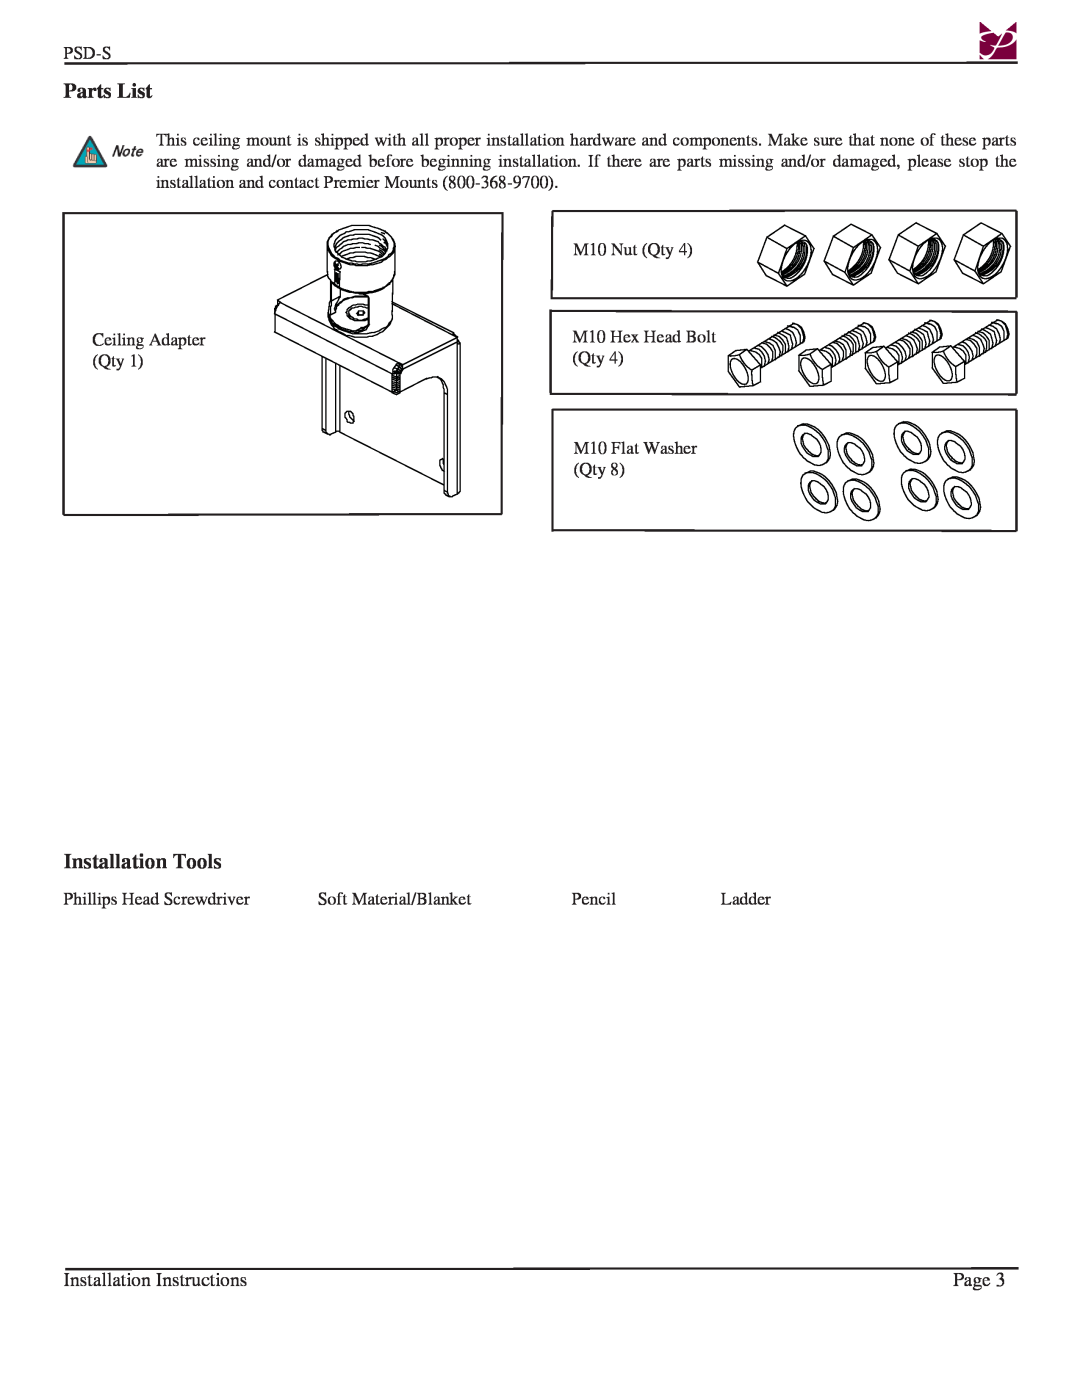 Premier Mounts PSD-S installation instructions Parts List, Installation Tools, Installation Instructions, Page 